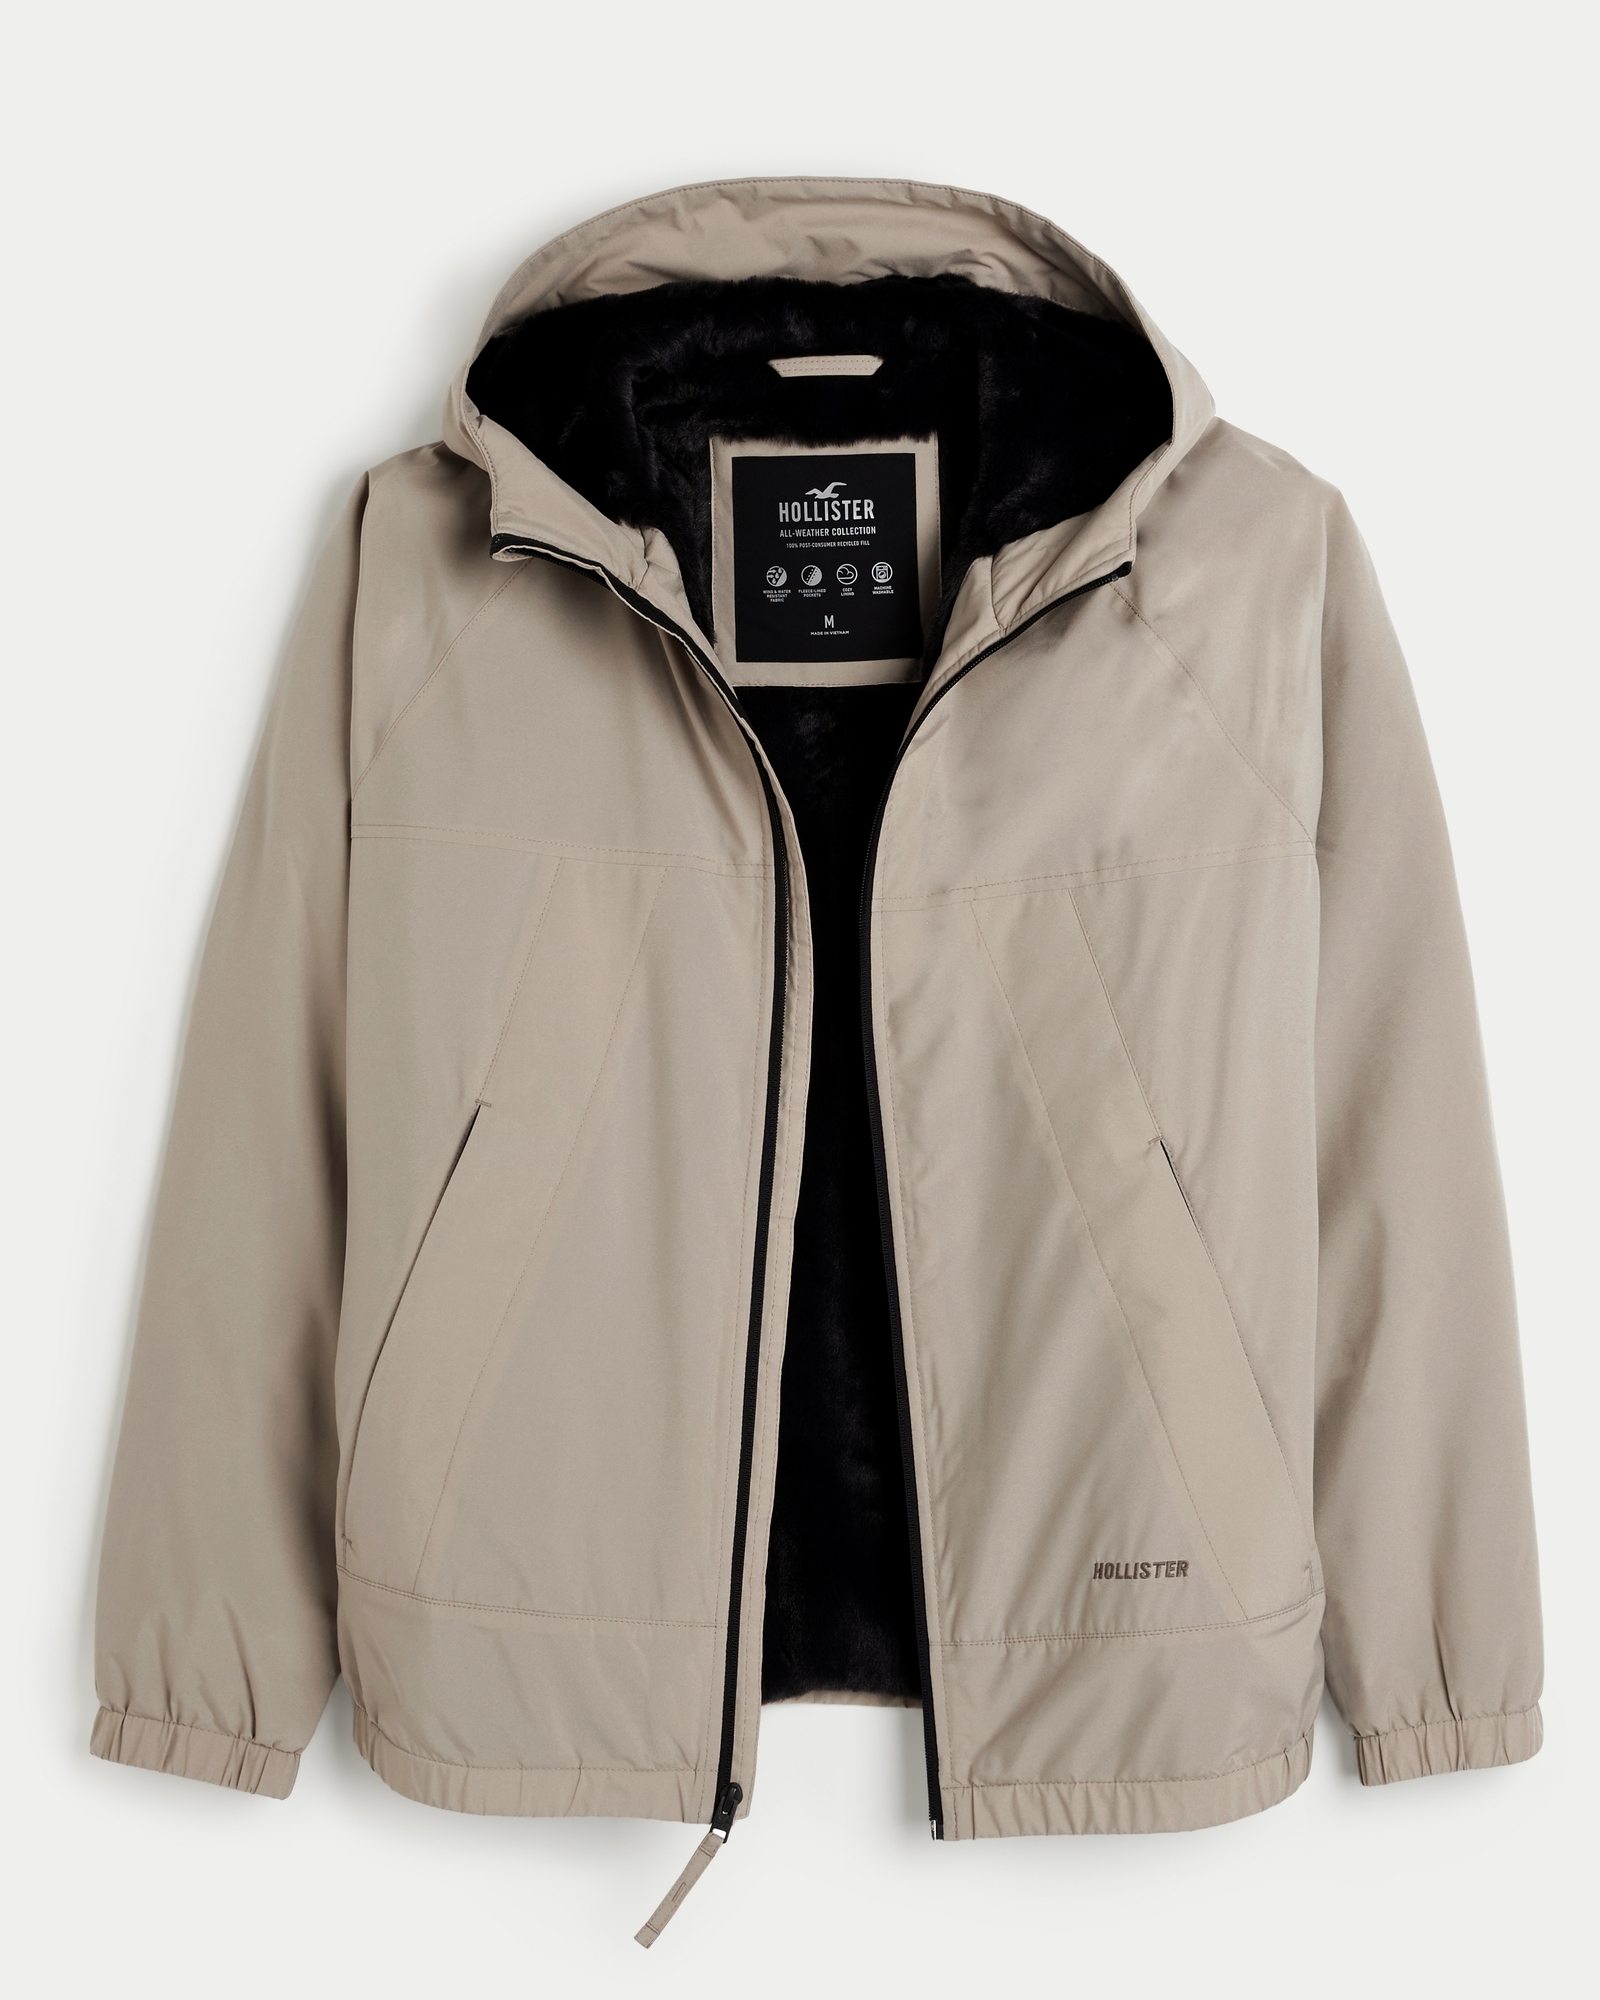 Best Hollister All Weather Jacket for sale in San Jose, California for 2024